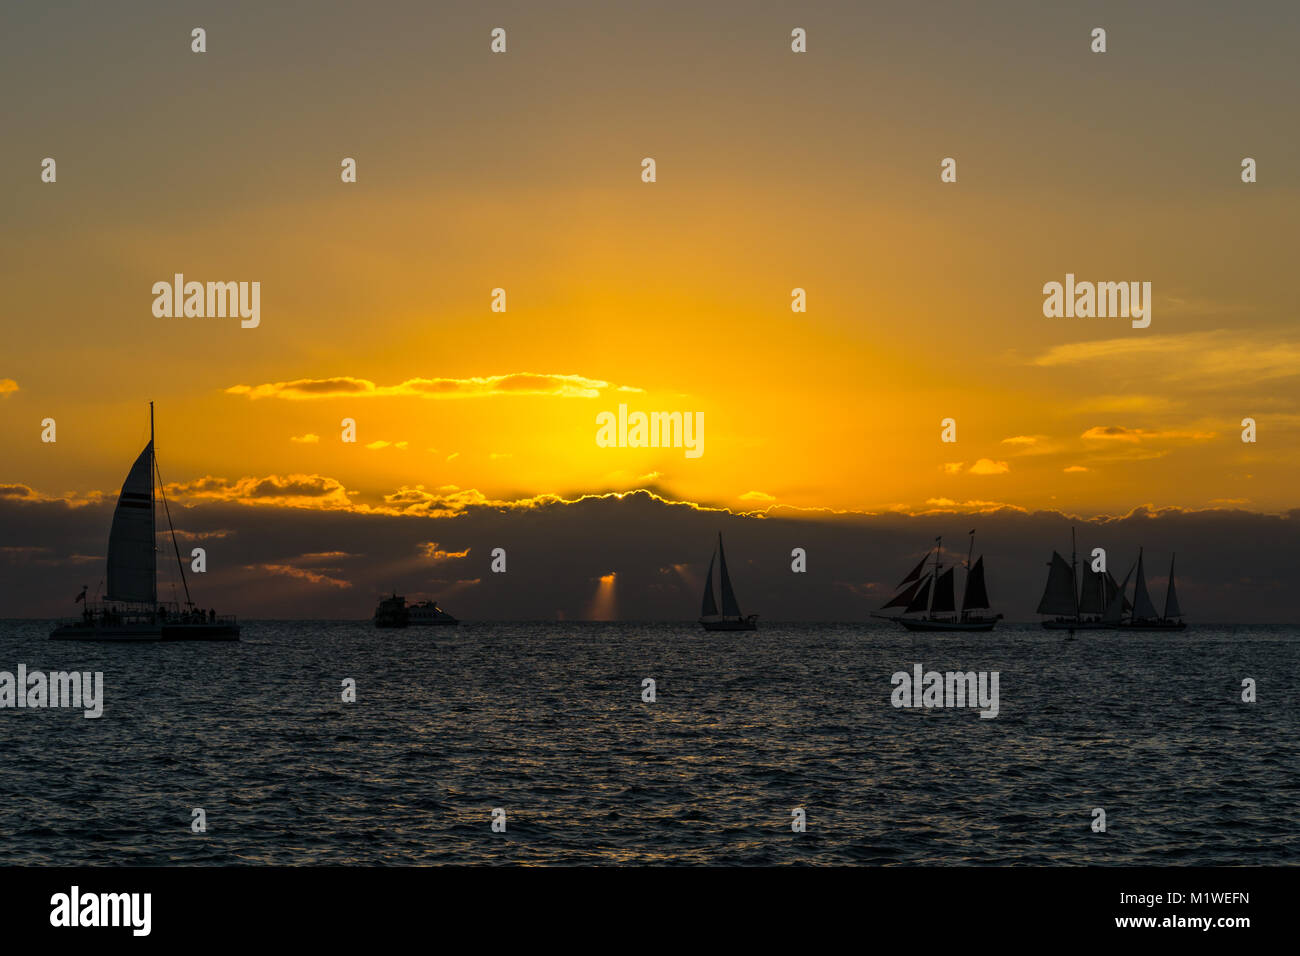 USA, Florida, Beautiful huge sailing ships in romantic sunset atmosphere at key west Stock Photo